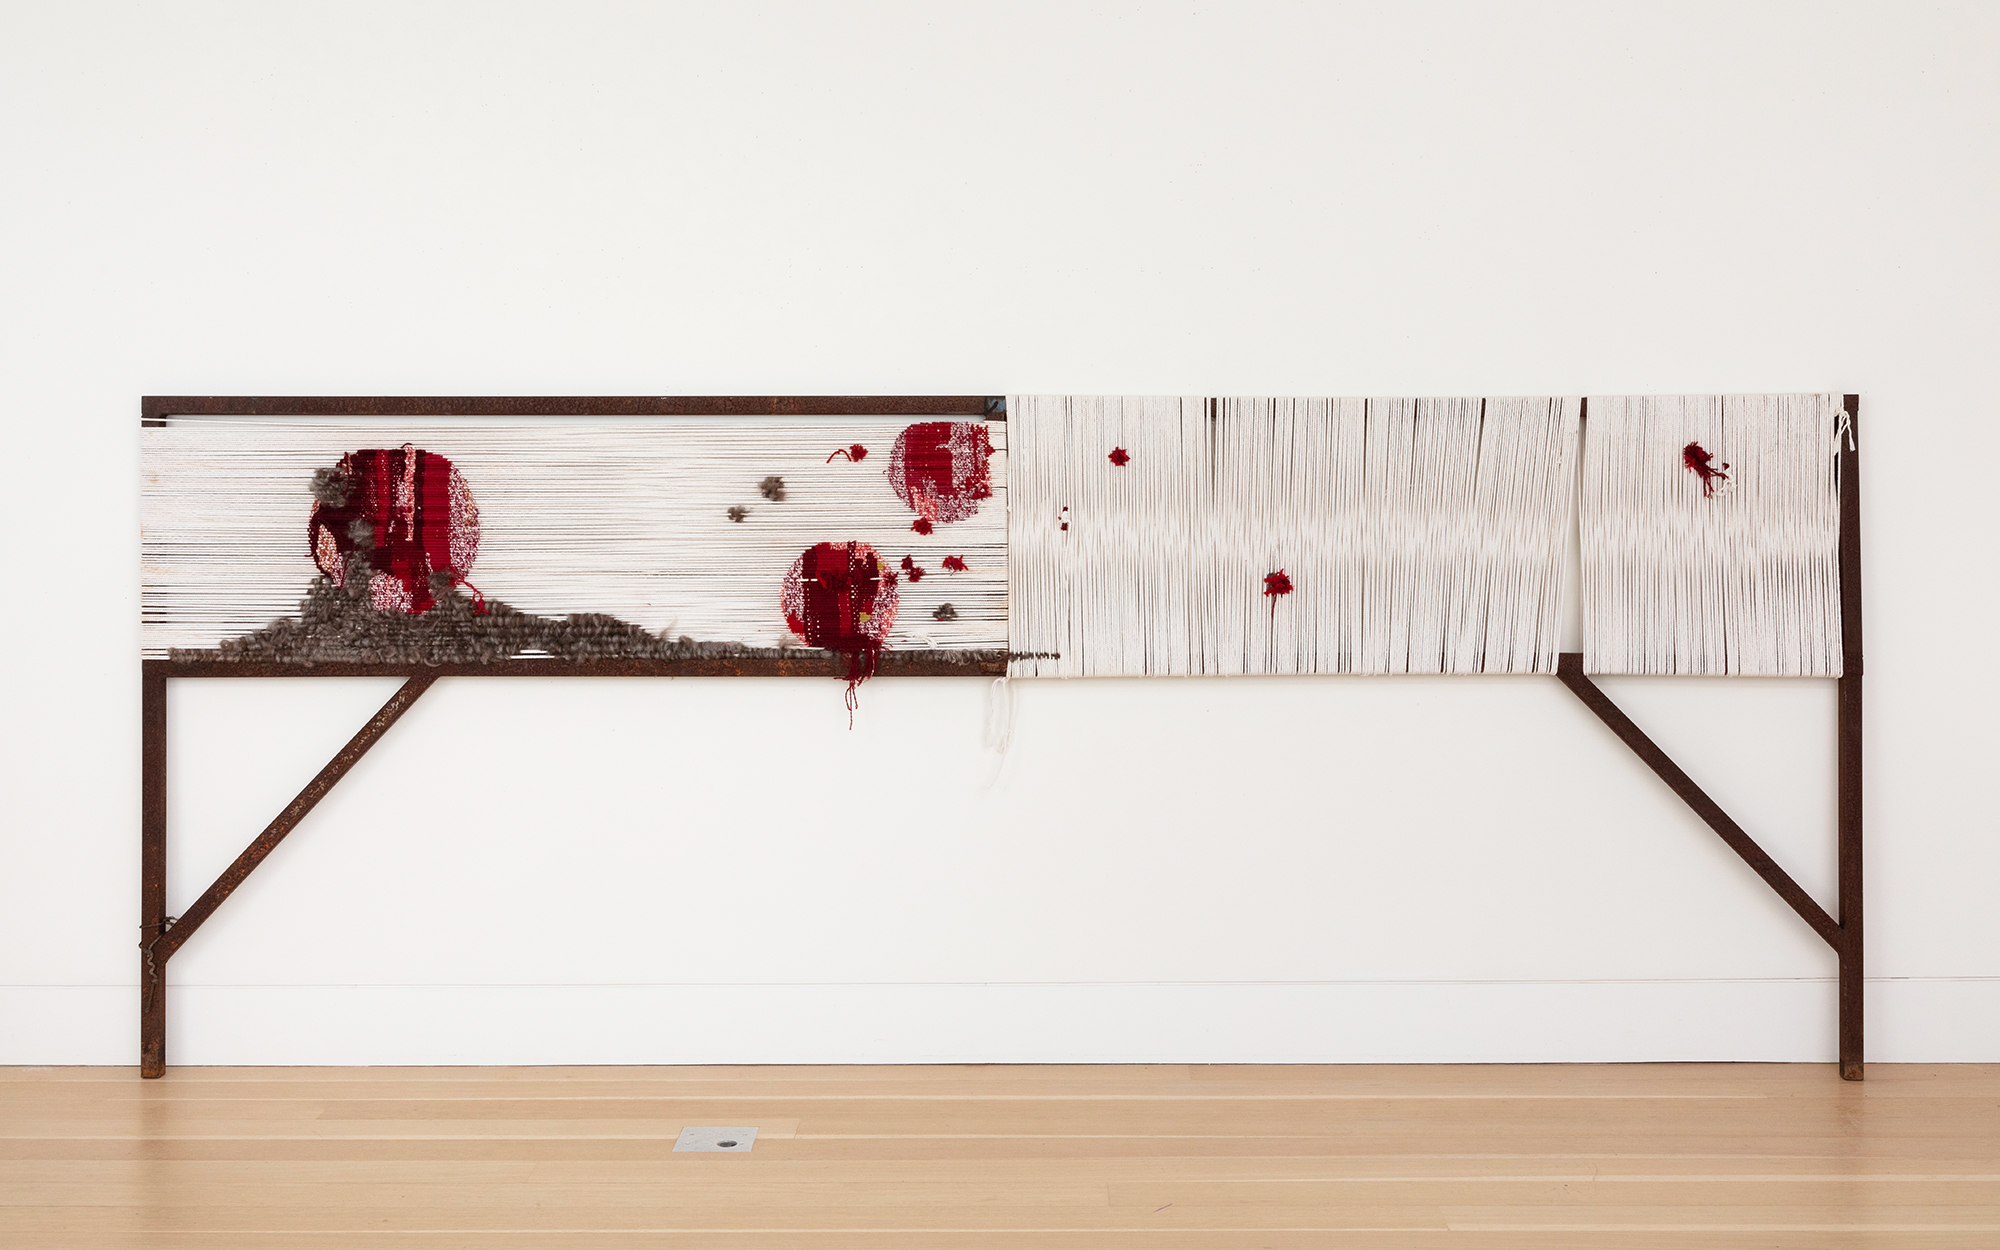 MARKING TIME, 2021 cotton, wool, steel armature, 46 x 116 1/4 x 2 inches Jenny Gorman photography